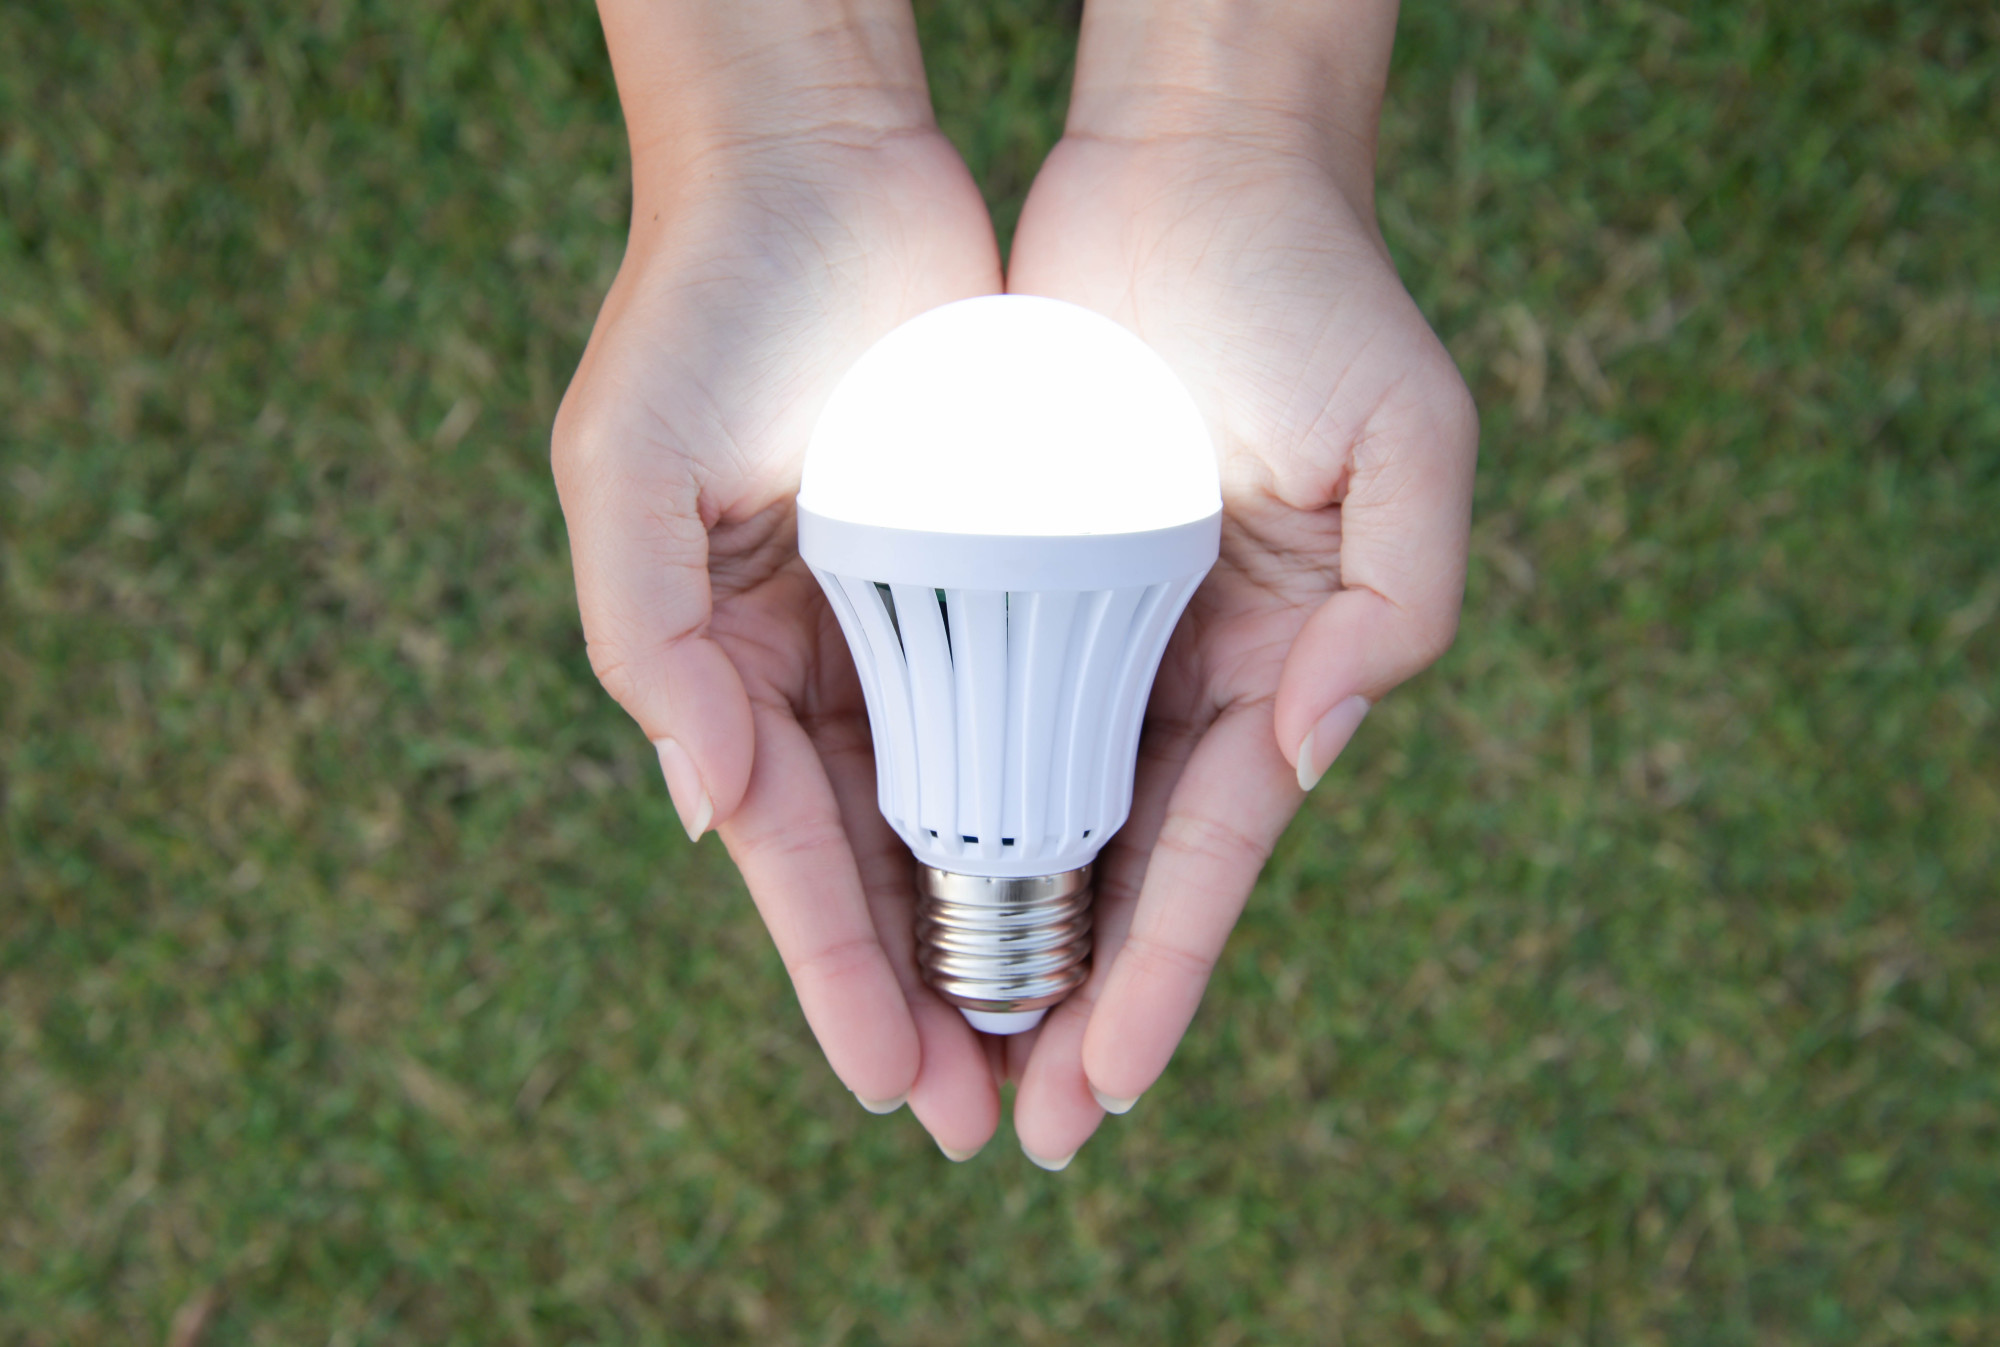 Upgrading your home's lights to energy-efficient LEDs can help slash your monthly utility bill. Here's a quick look at the other benefits.